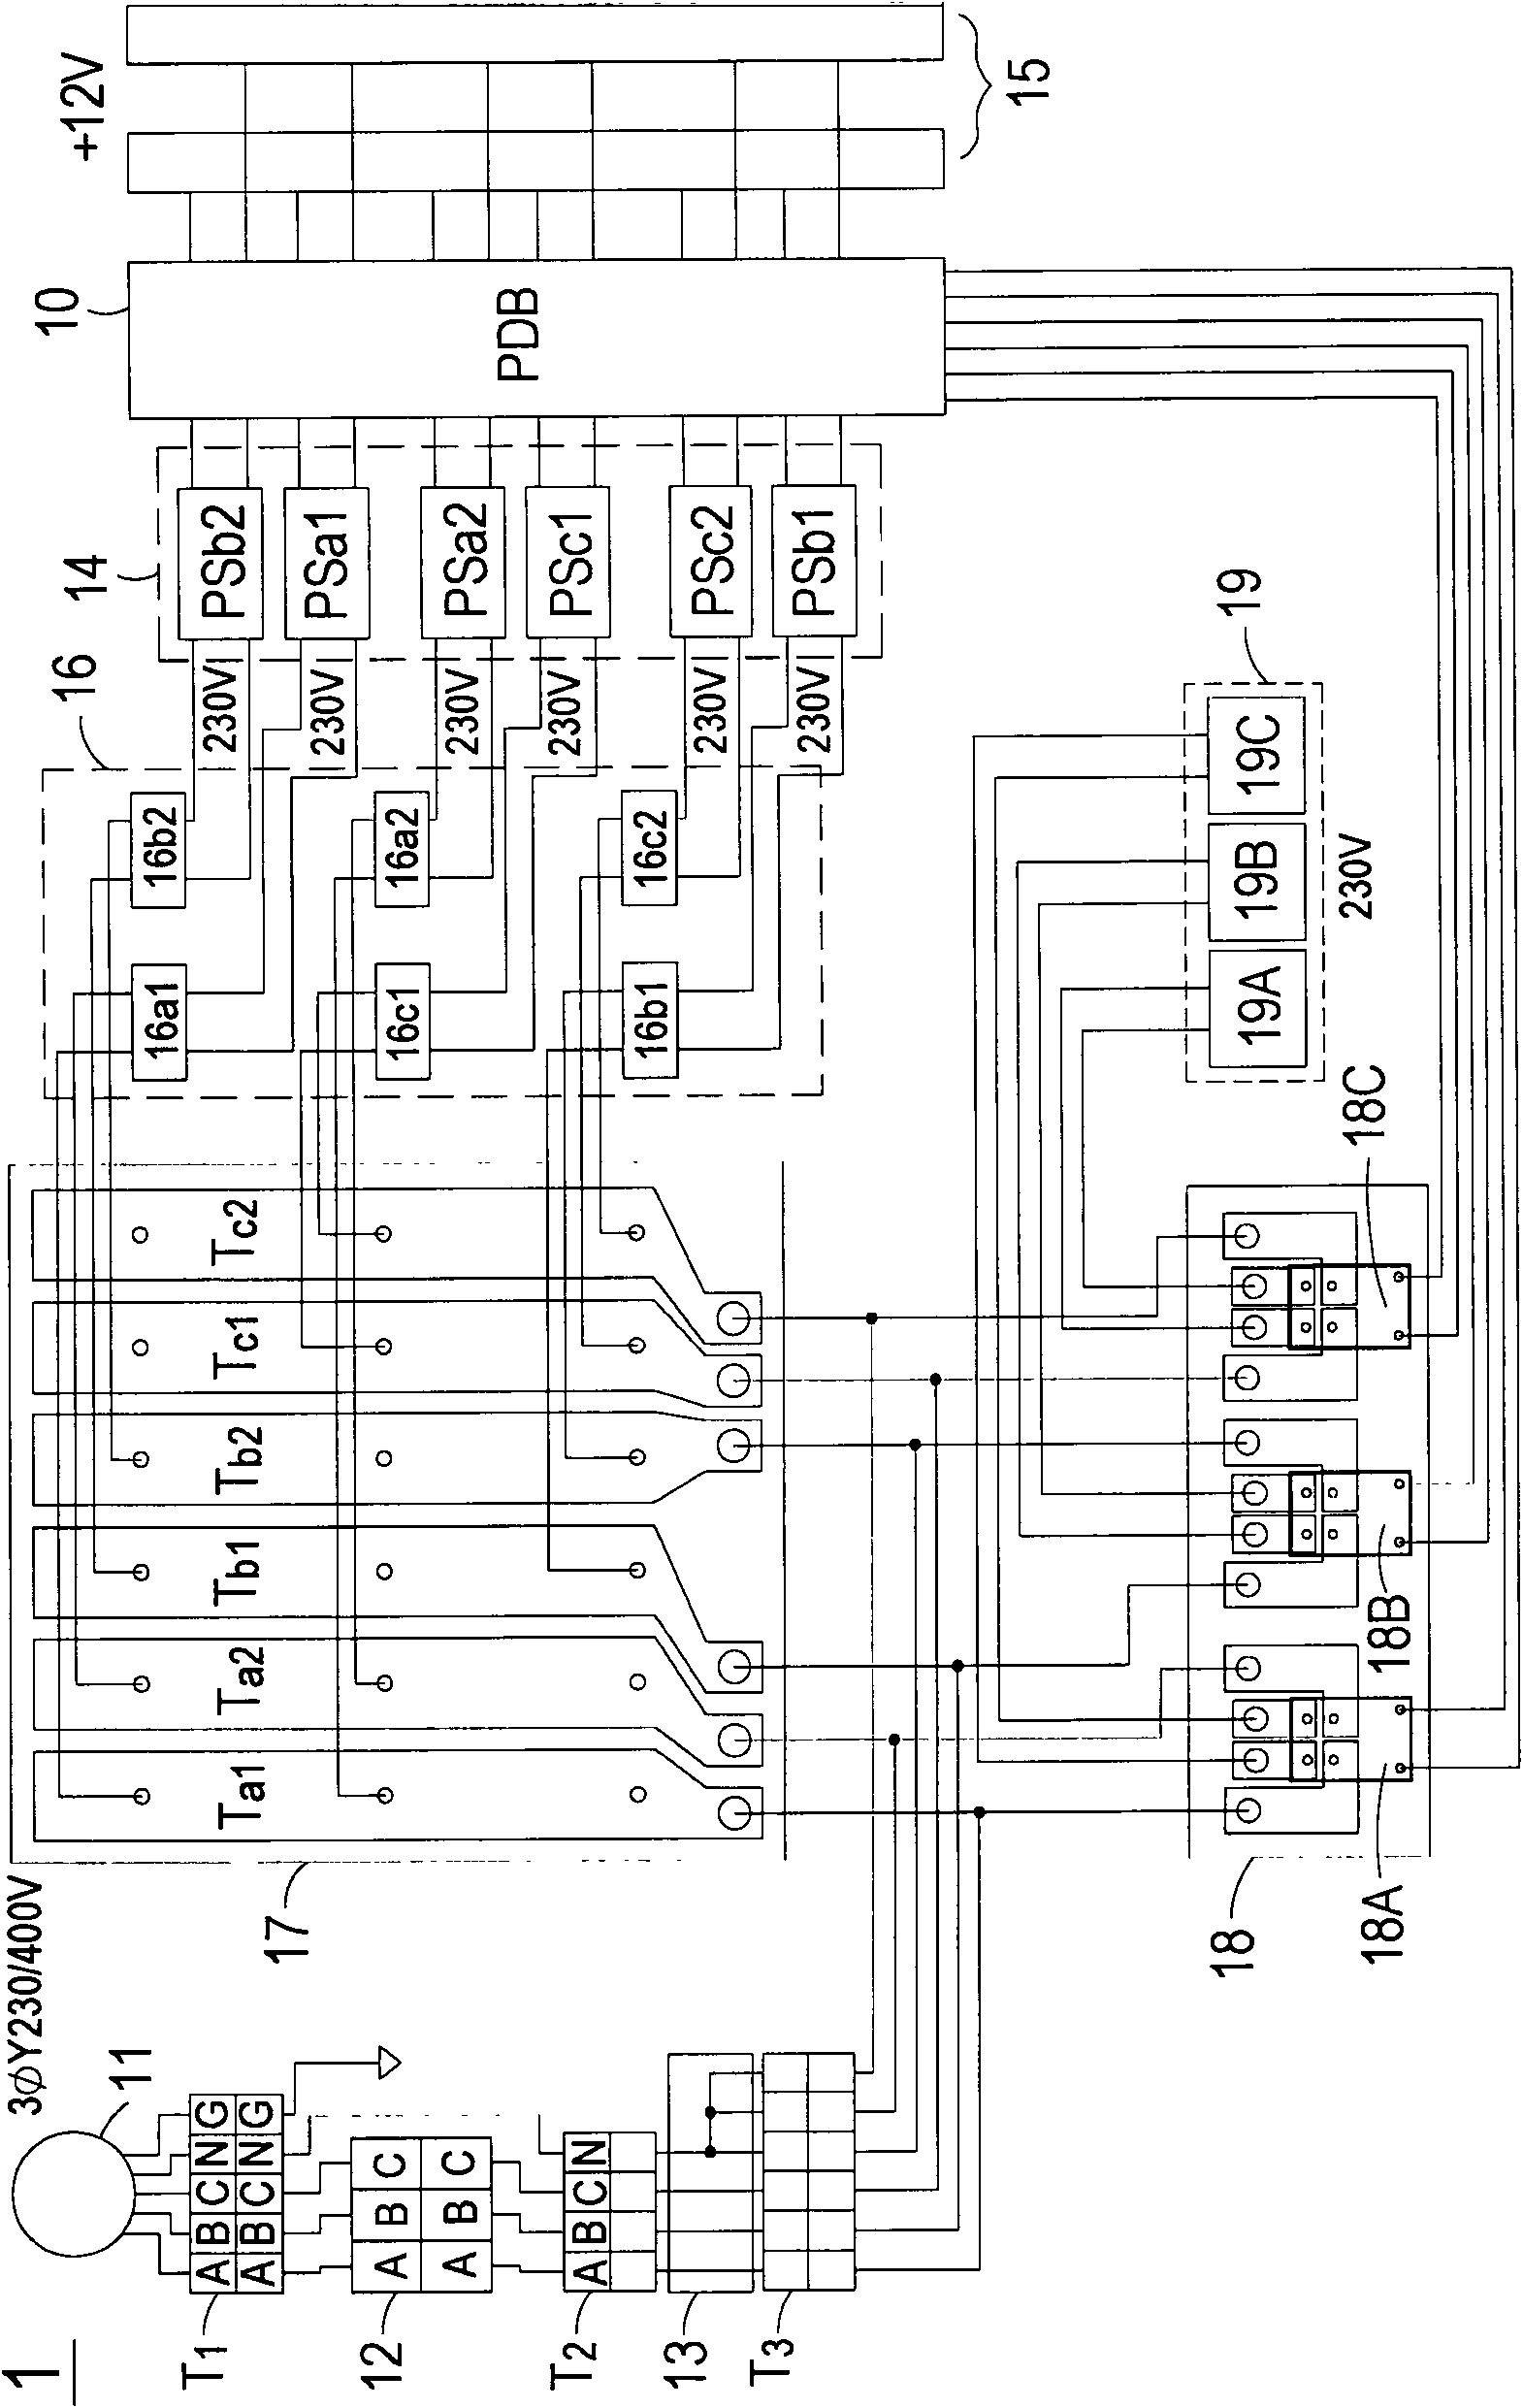 Power-supply distribution unit capable of accessing various three-phase power supplies and multi-type single-phase power supplies